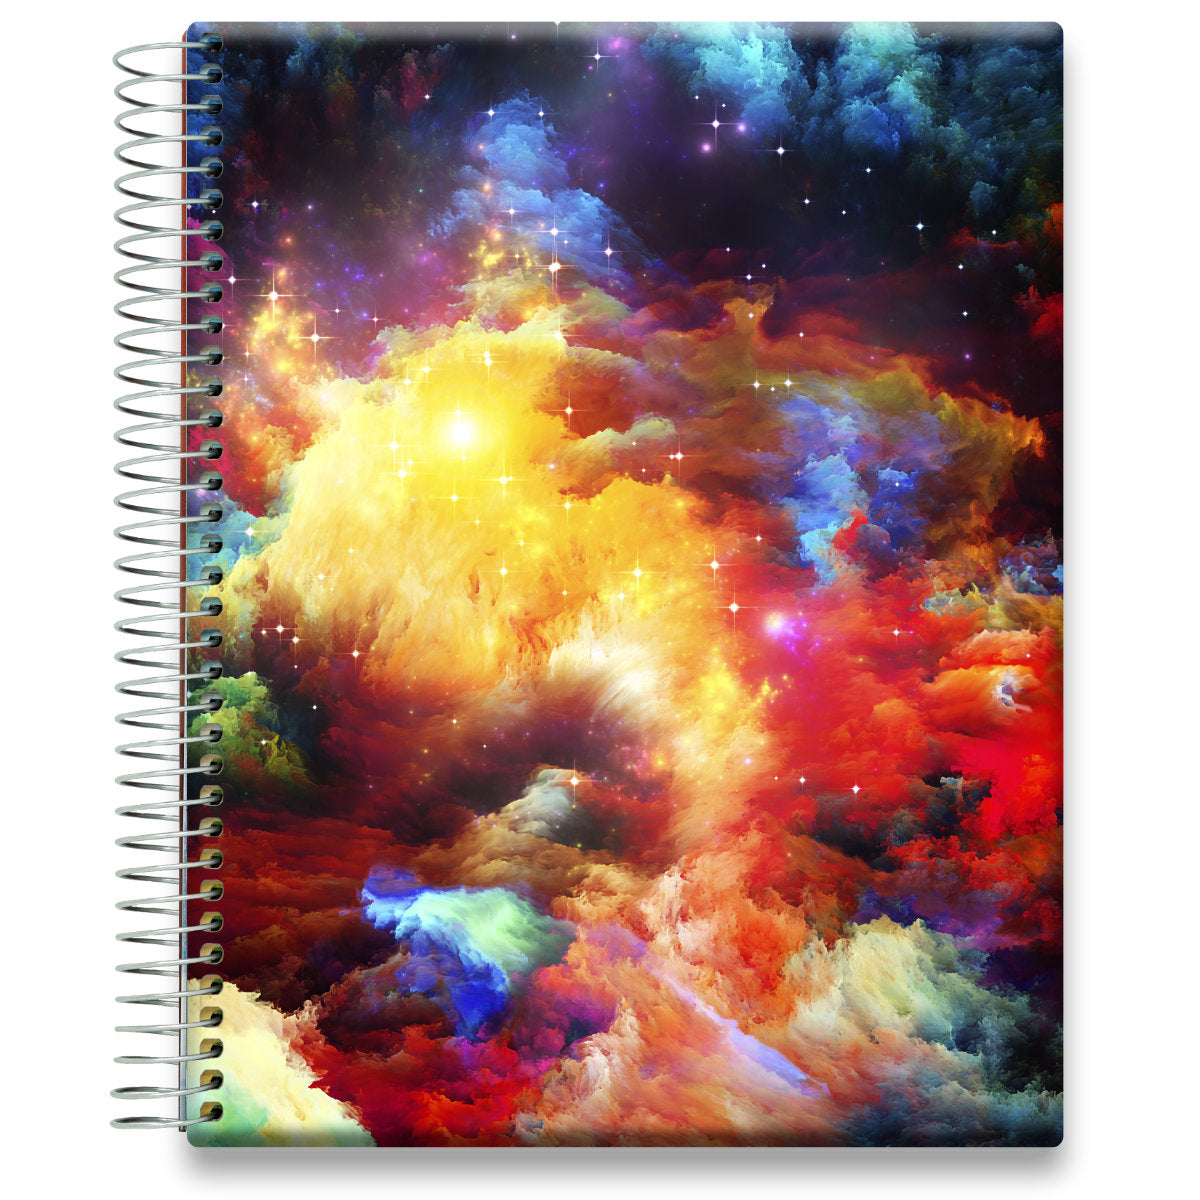 Coaching Session + Oct 2024 to Dec 2025 Planner - Cosmic Art